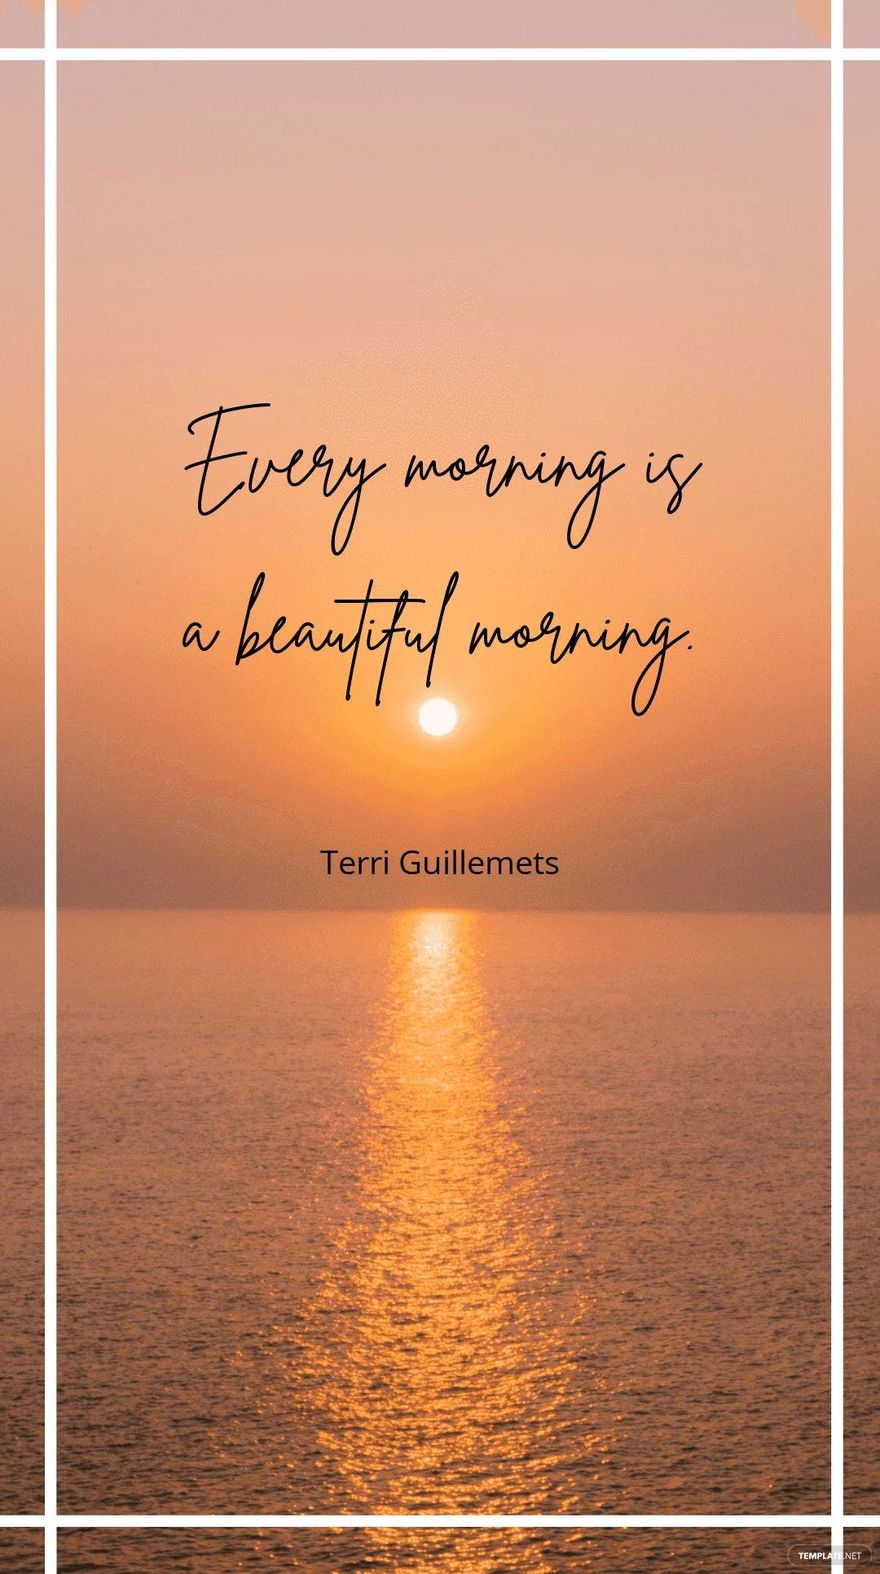 Terri Guillemets - Every morning is a beautiful morning.